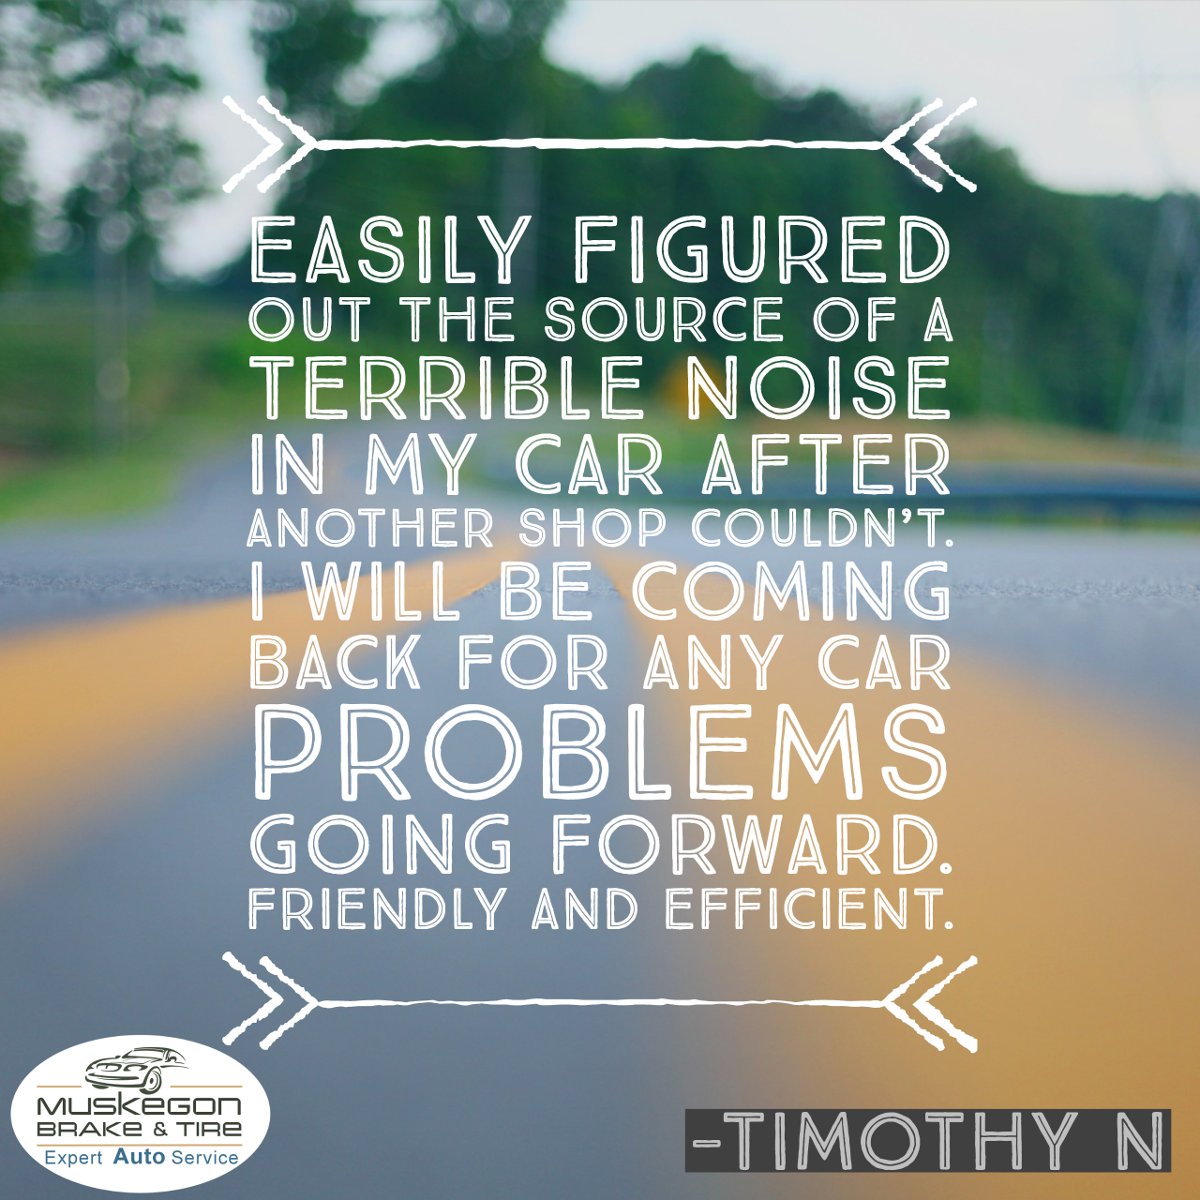 Sometimes it takes an experienced set of eyes to figure out that weird noise your car started making. We've got lots of experience with strange car noises...
That's why our customers love us, we take care of it!

#fivestarreview #muskegonbrake #carrepair